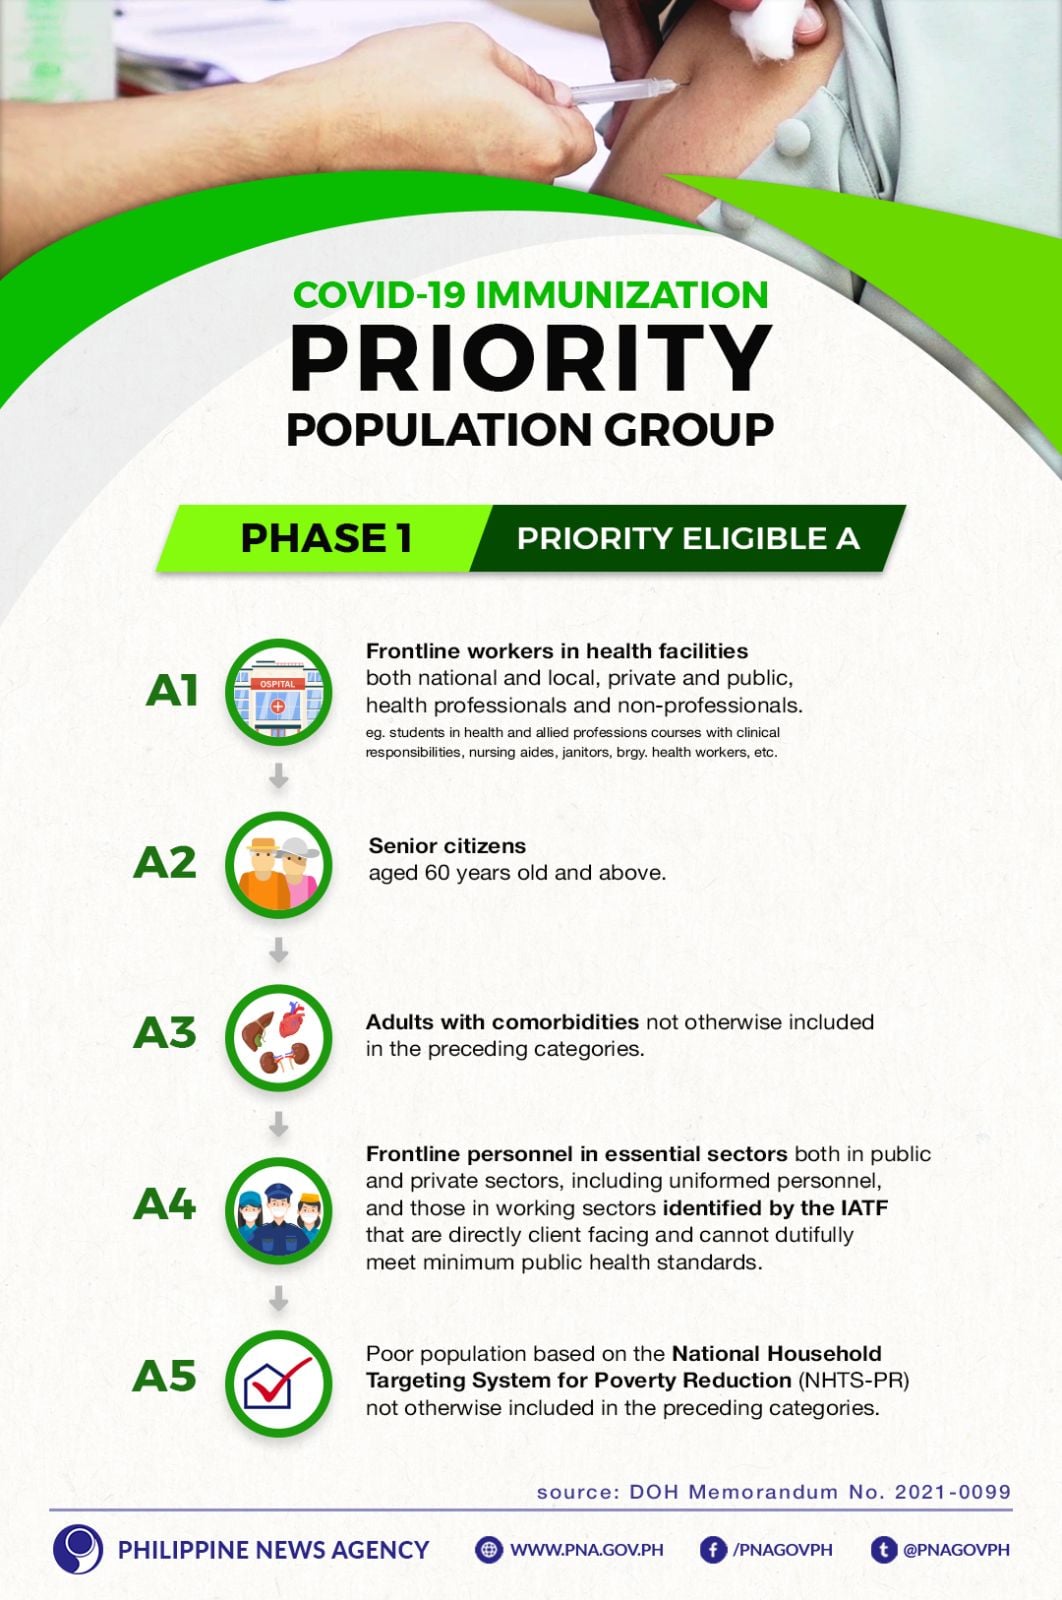 The Philippines includes Tourism frontliners in A1 vaccine priority group. Image courtesy of Philippine News Agency.